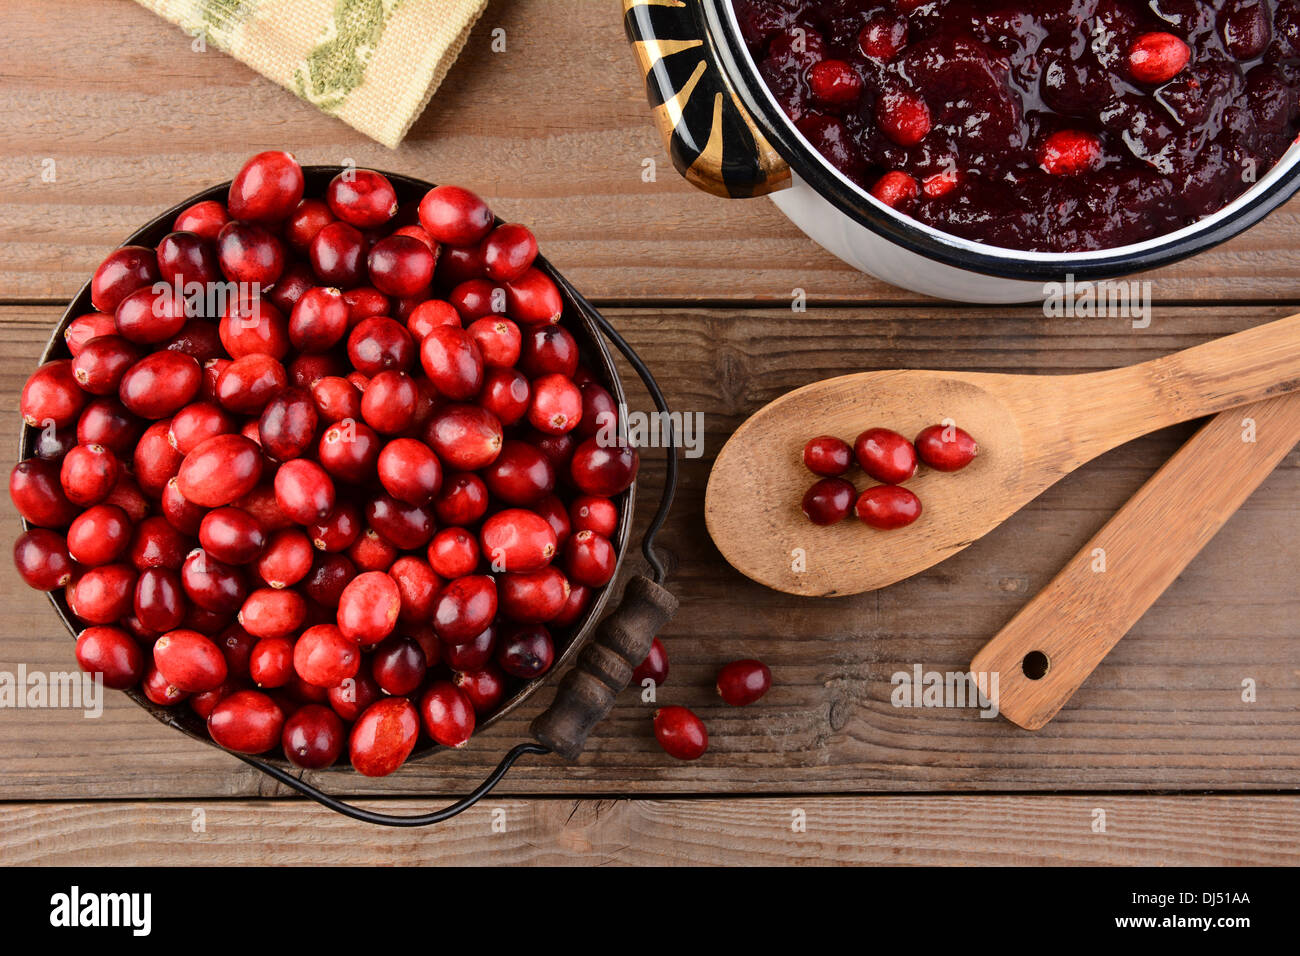 Overhead of a bucket of cranberries and a pot full of whole cranberry sauce on a rustic wooden table. Stock Photo